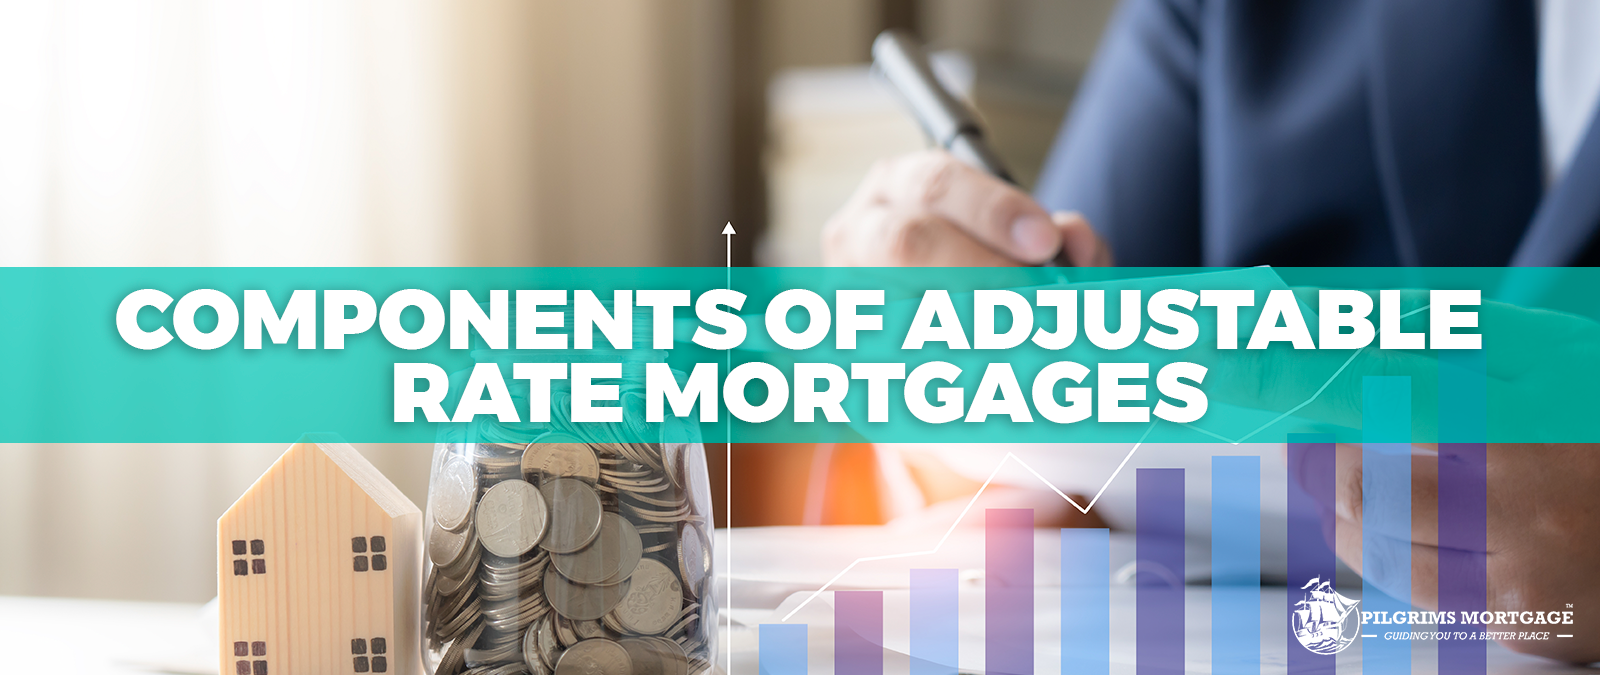 COMPONENTS OF ADJUSTABLE RATE MORTGAGES